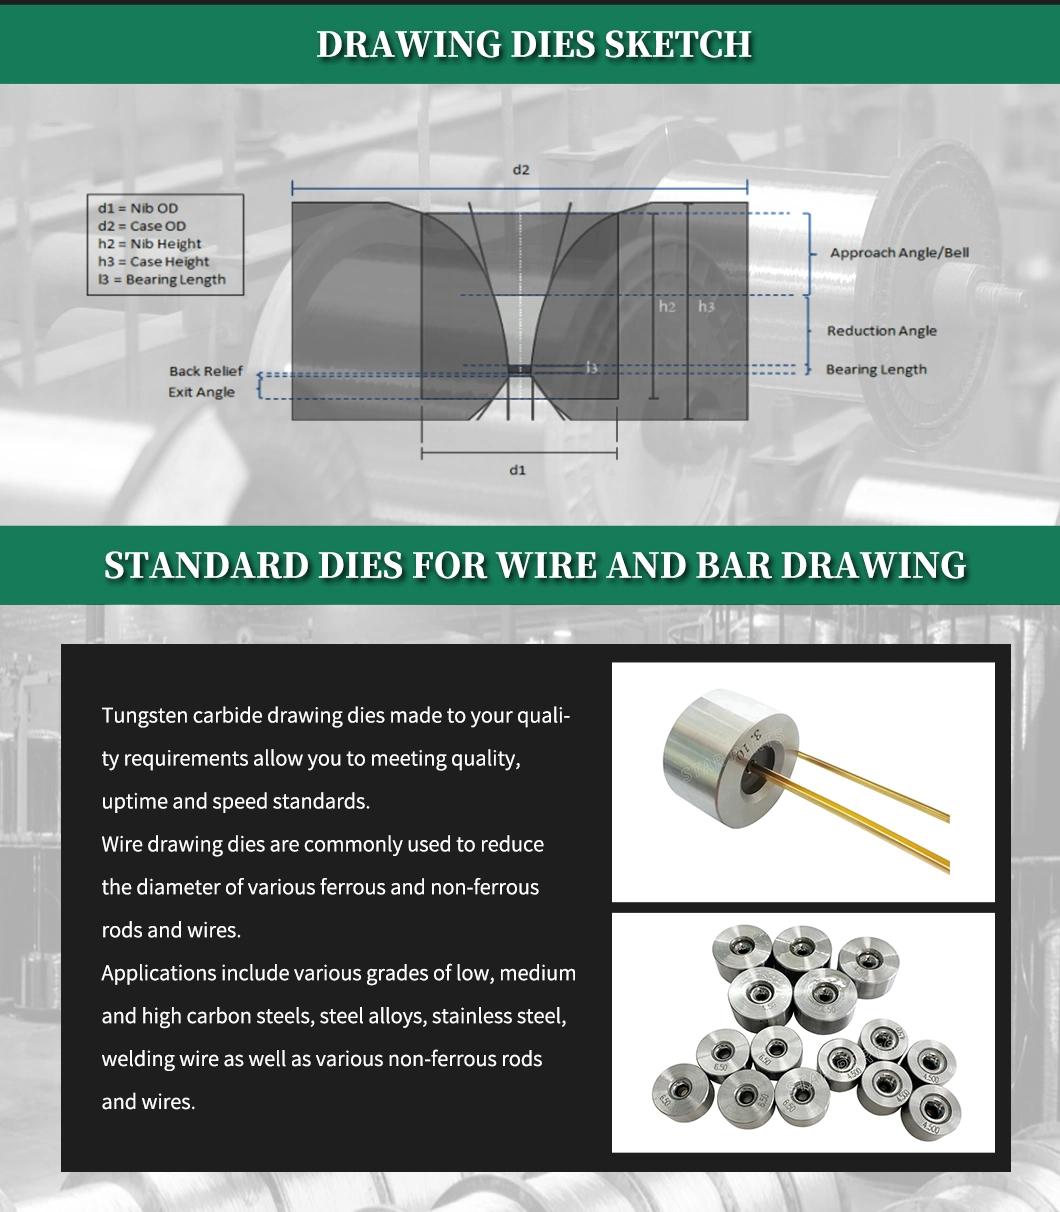 Tungsten Carbide Wire Drawing Dies for Wire Industry